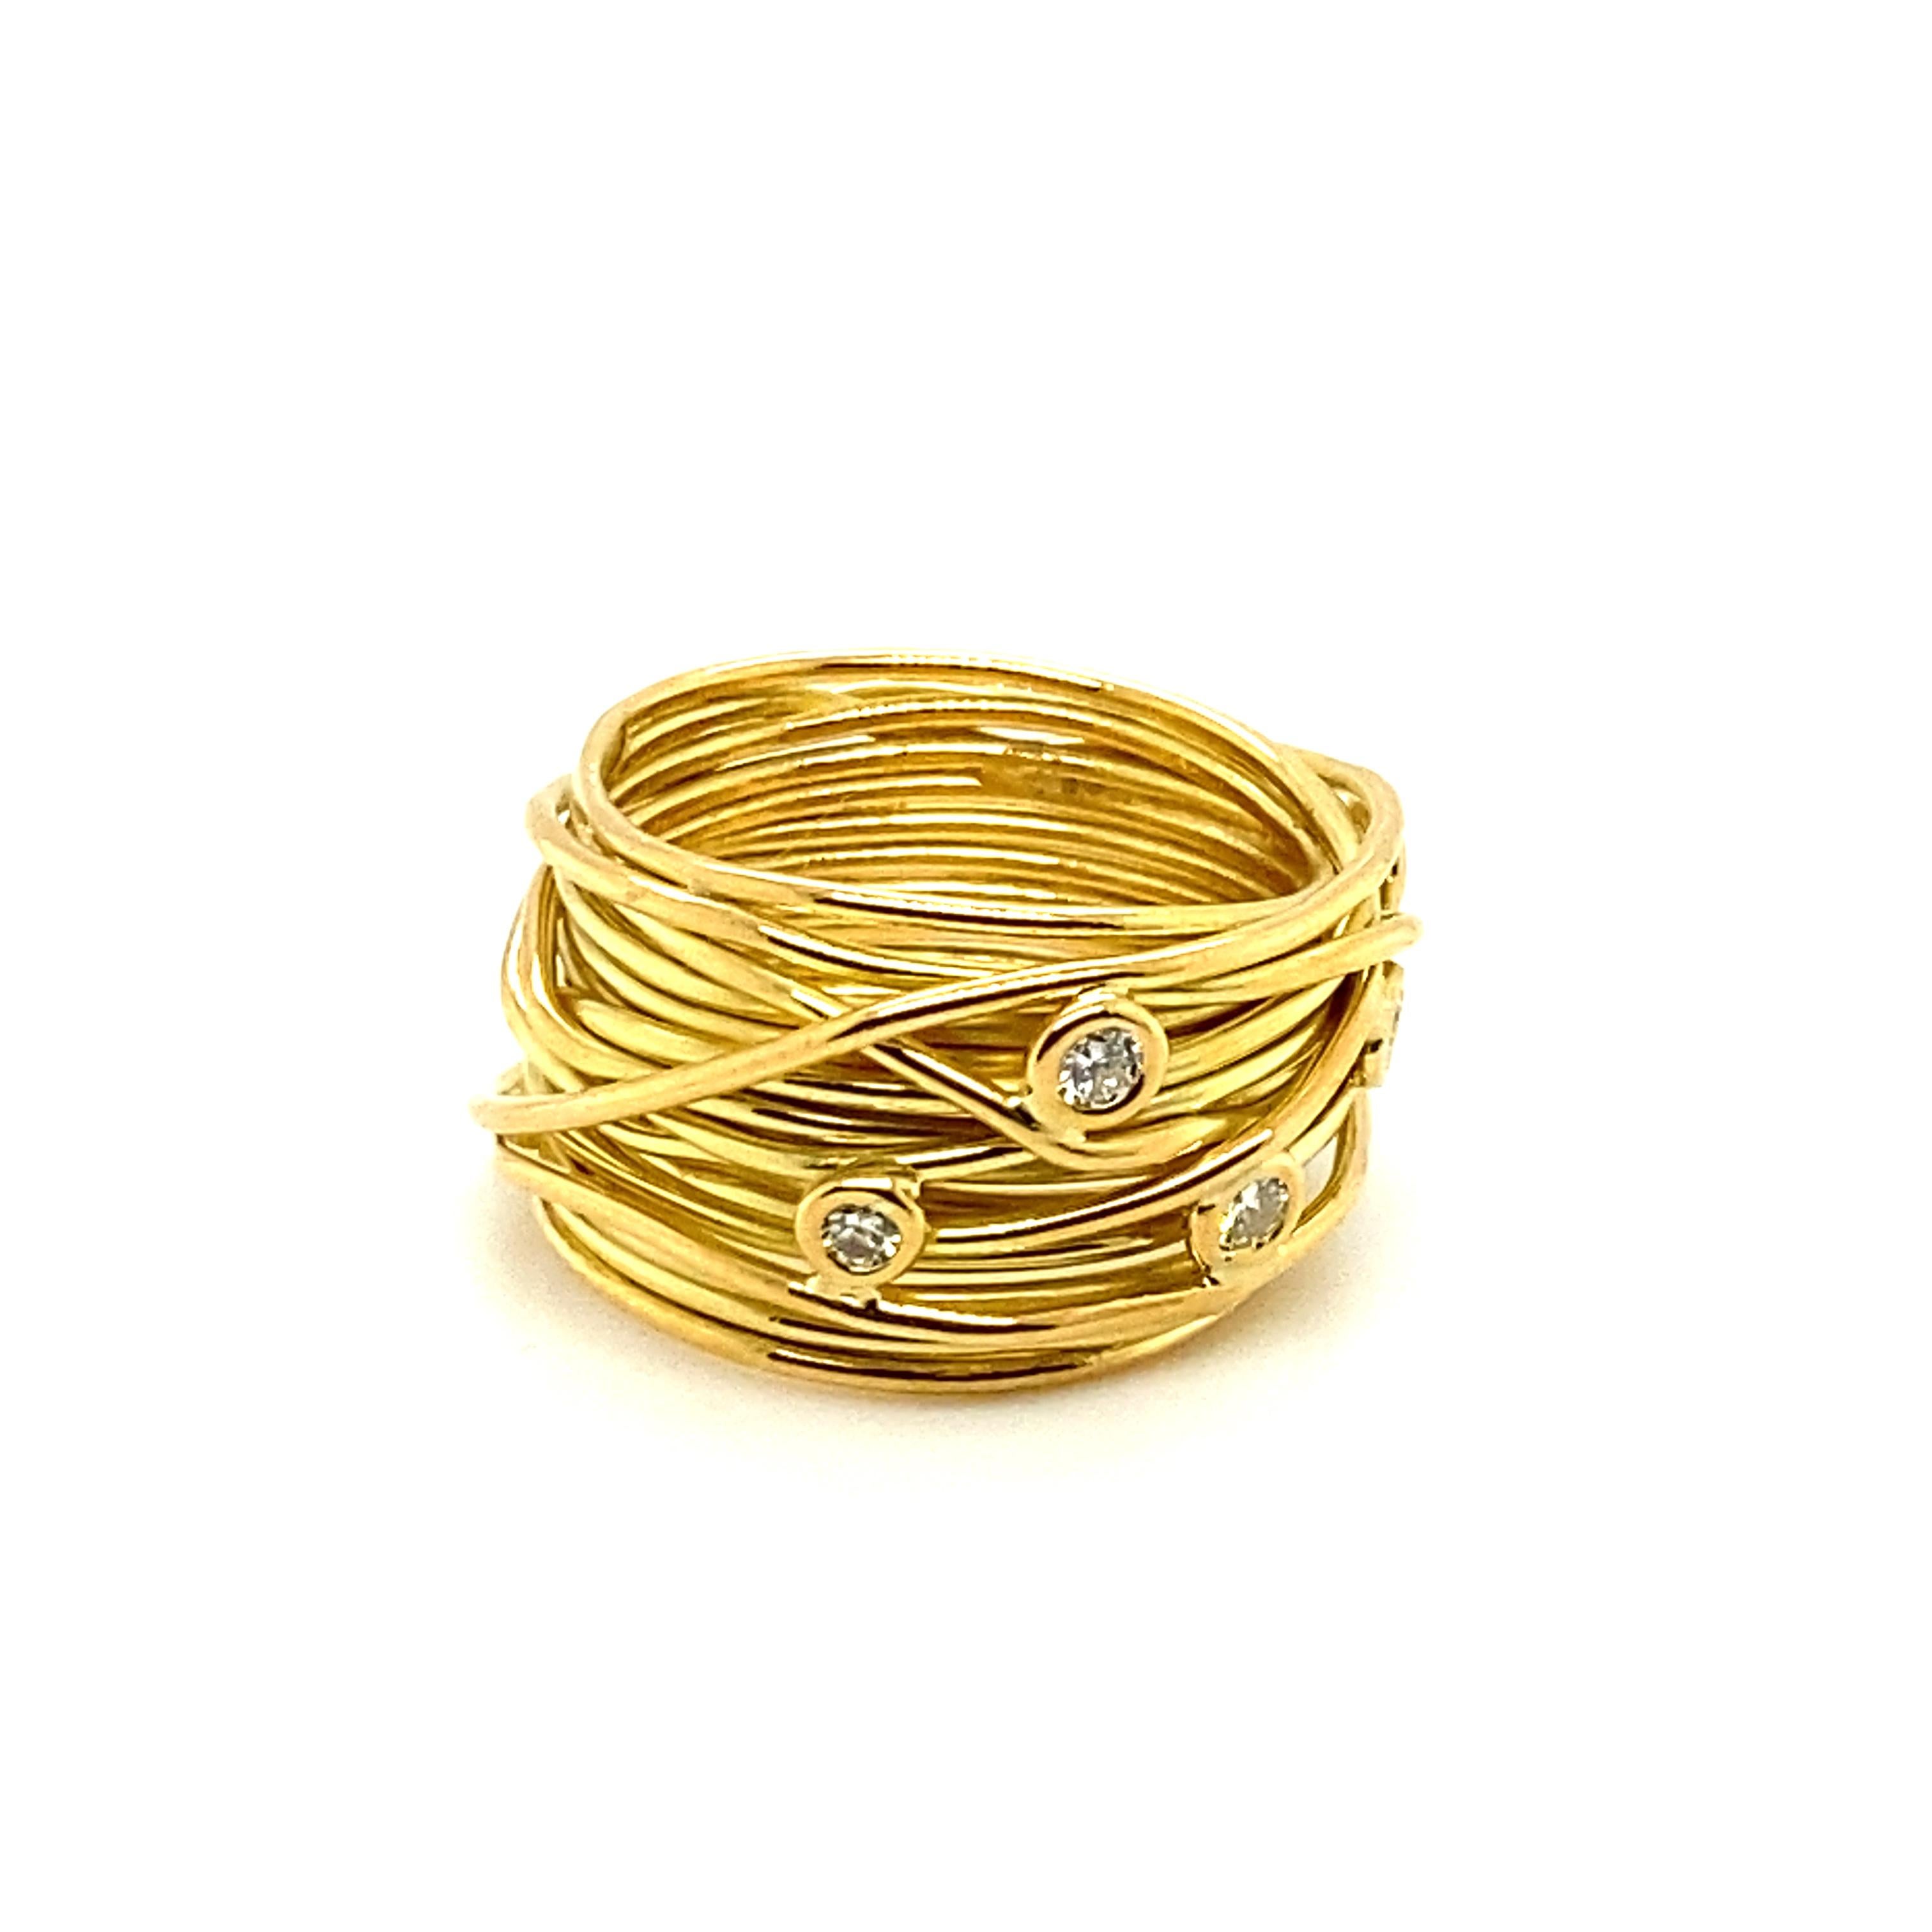 Iconic Diamond Bird's Nest Ring by Devon in 18 Karat Yellow Gold In Good Condition For Sale In Lucerne, CH